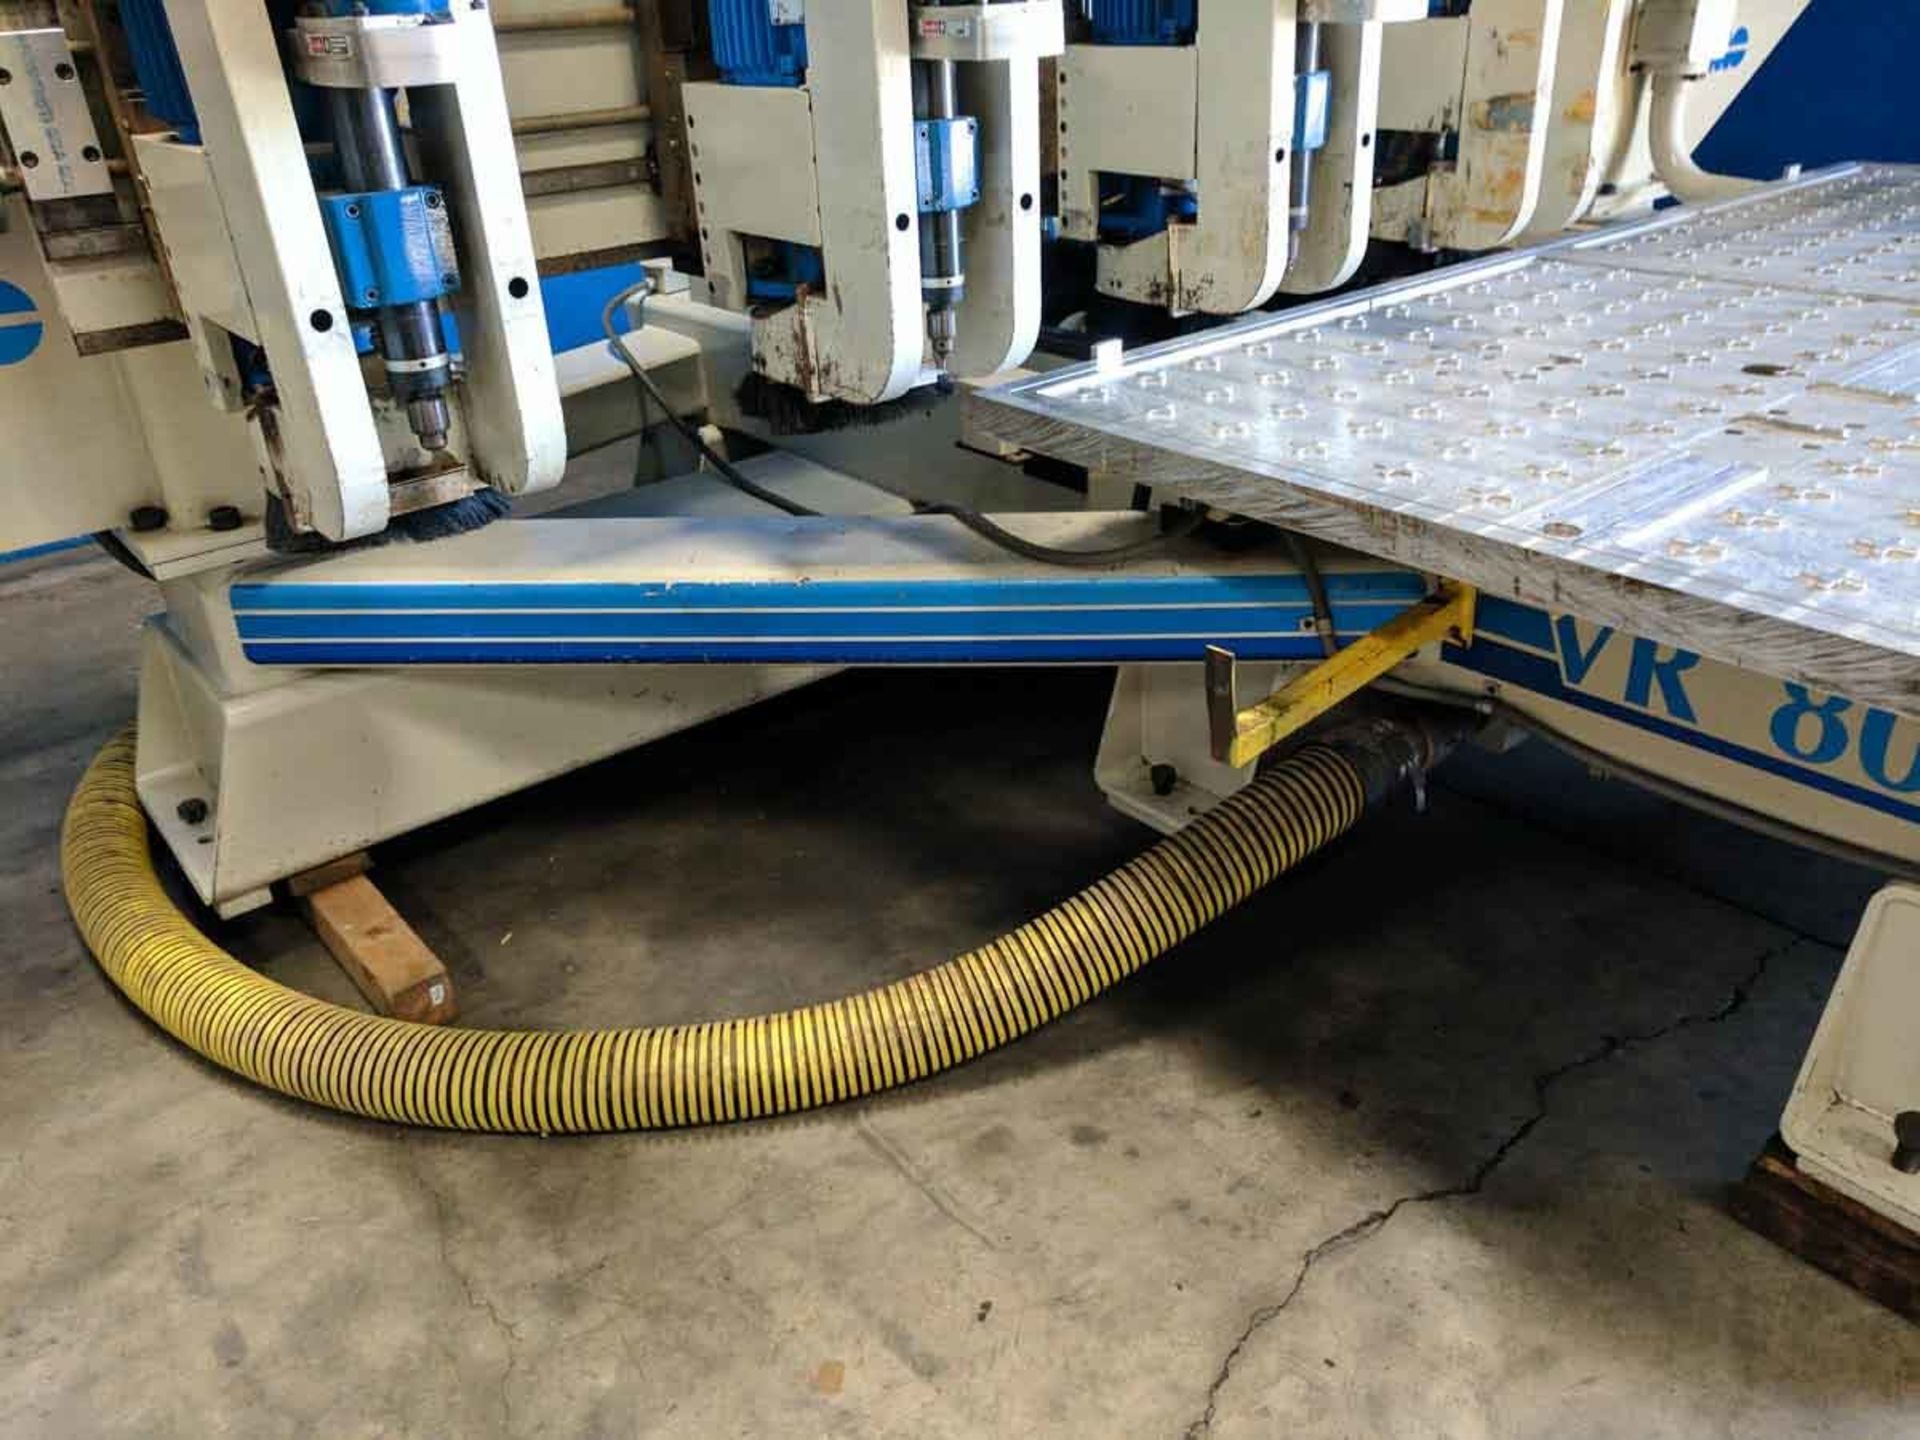 Komo VR805Q Fanuc CNC Metal Router 3 Axis 4 Spindle 96" x 60" Sheet Size - Located In: Huntington - Image 17 of 25